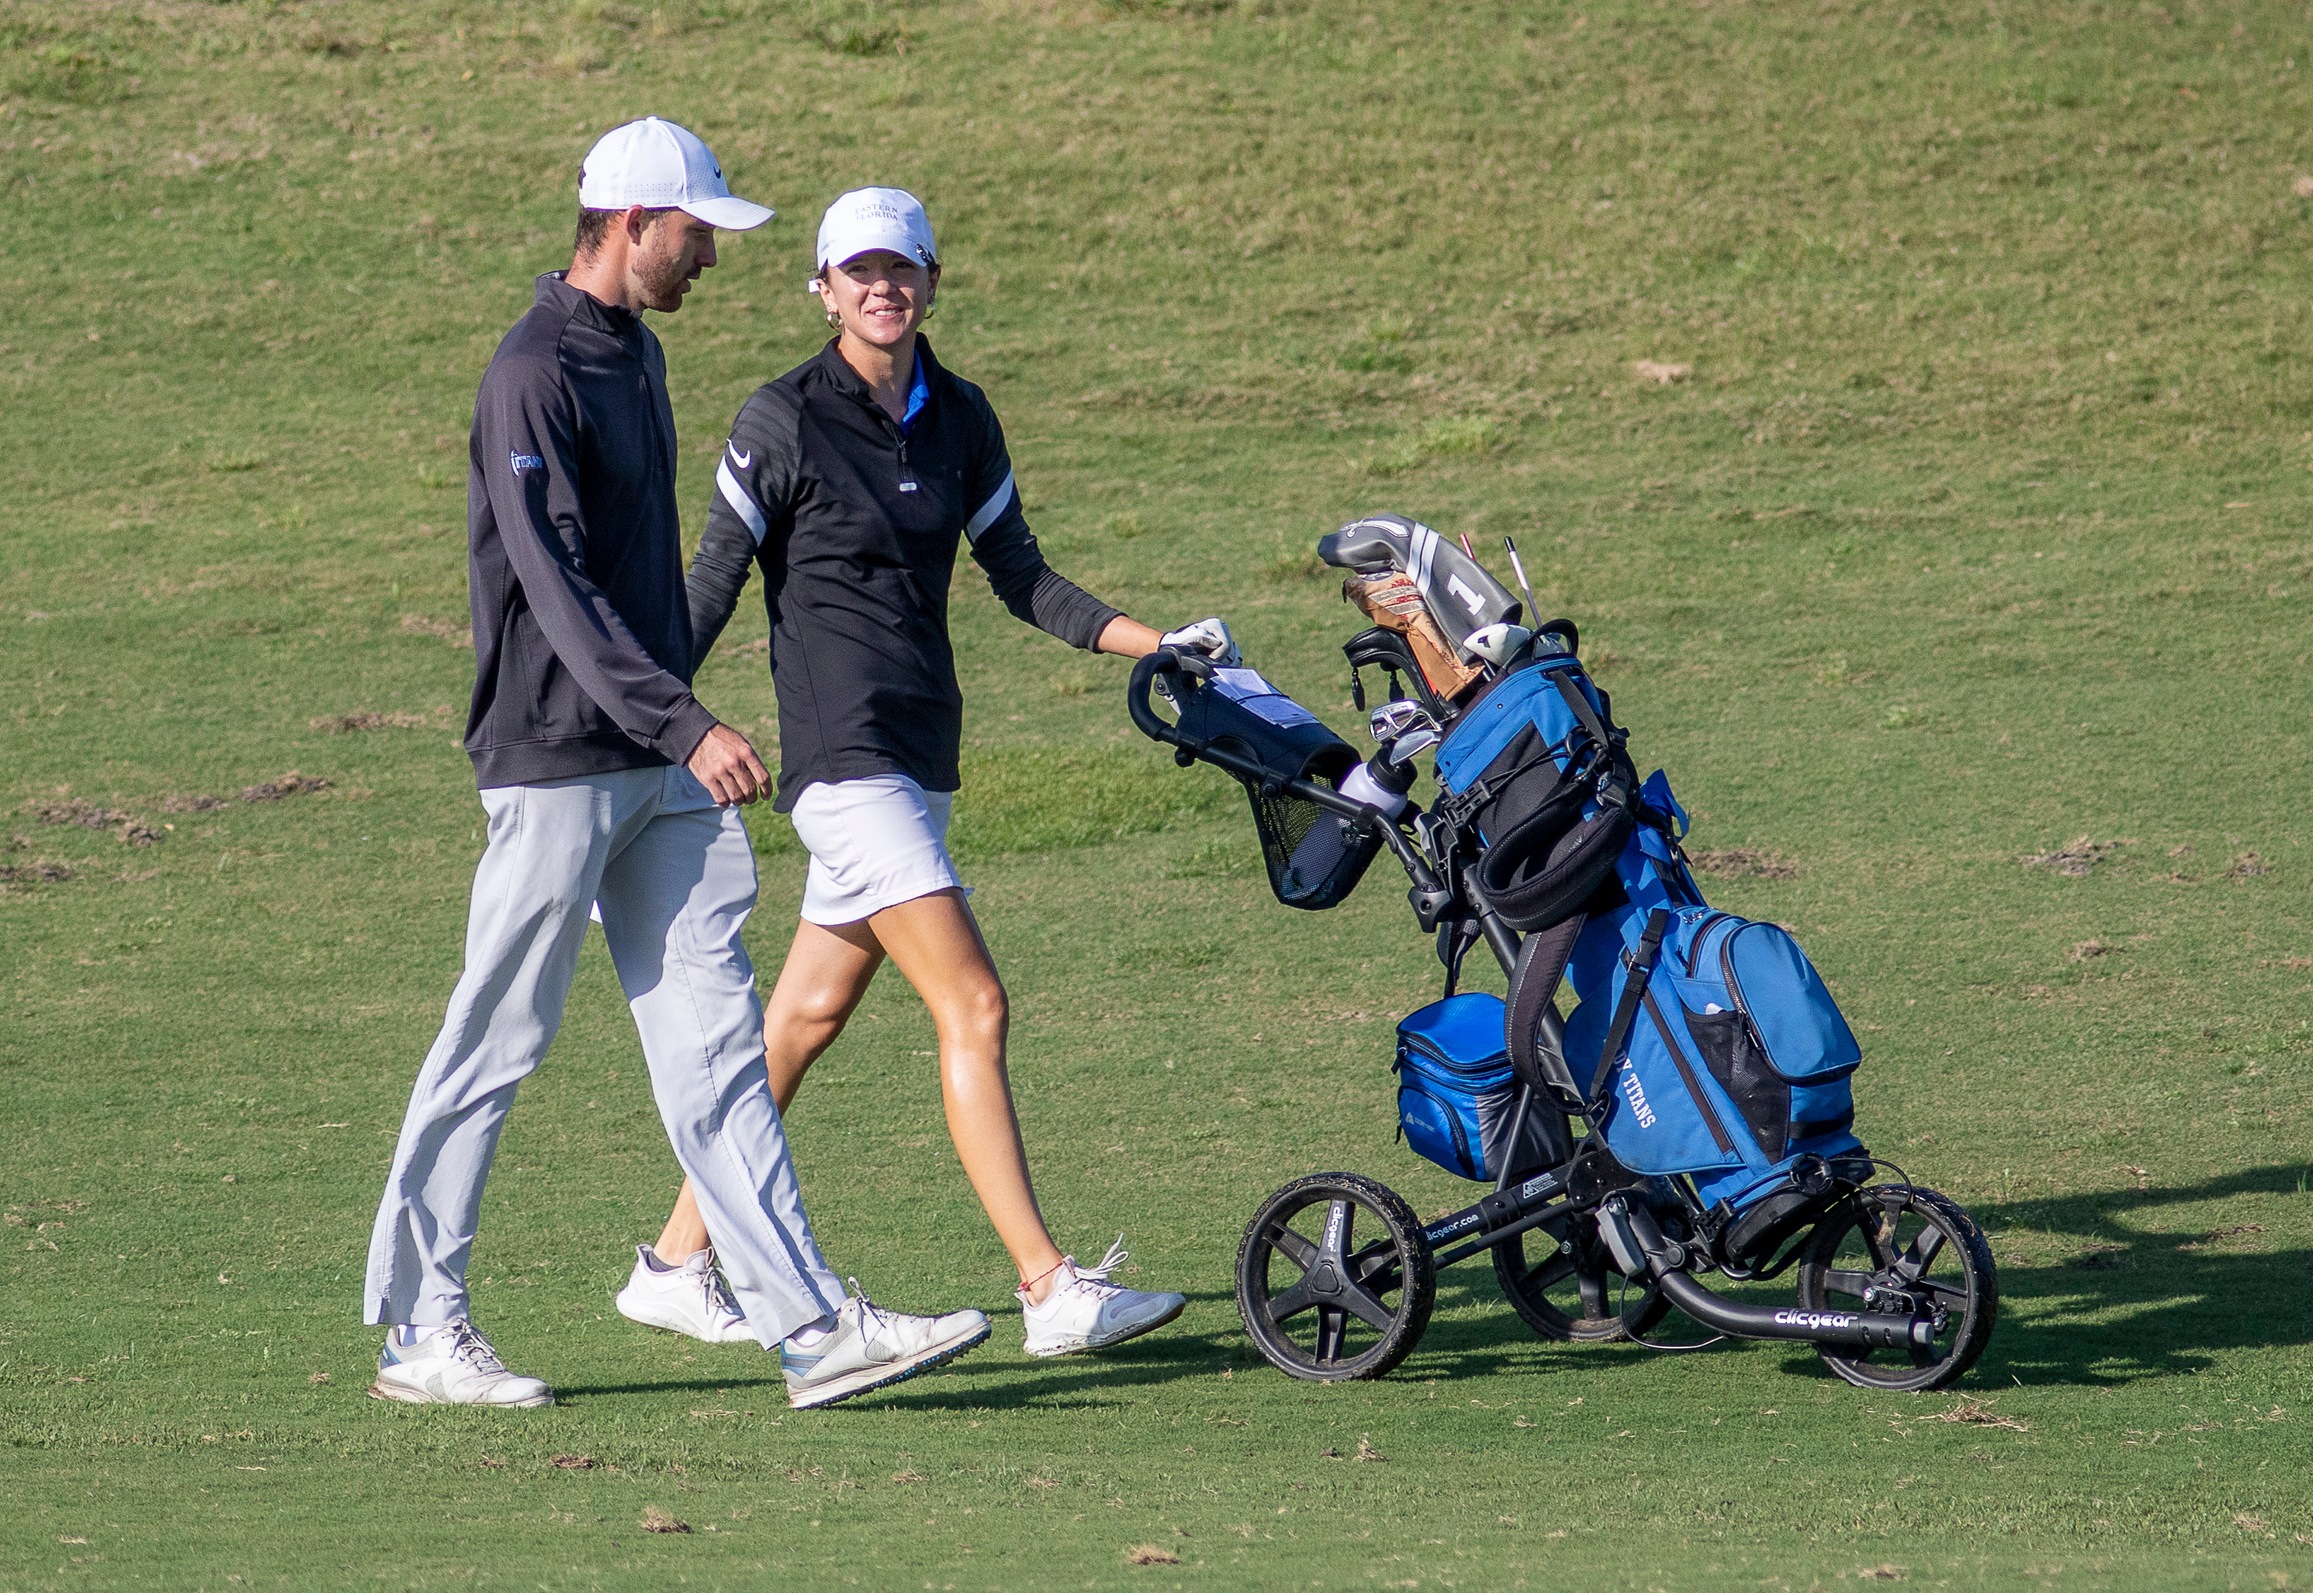 Women's golf team excited to make history, tee off at national tournament